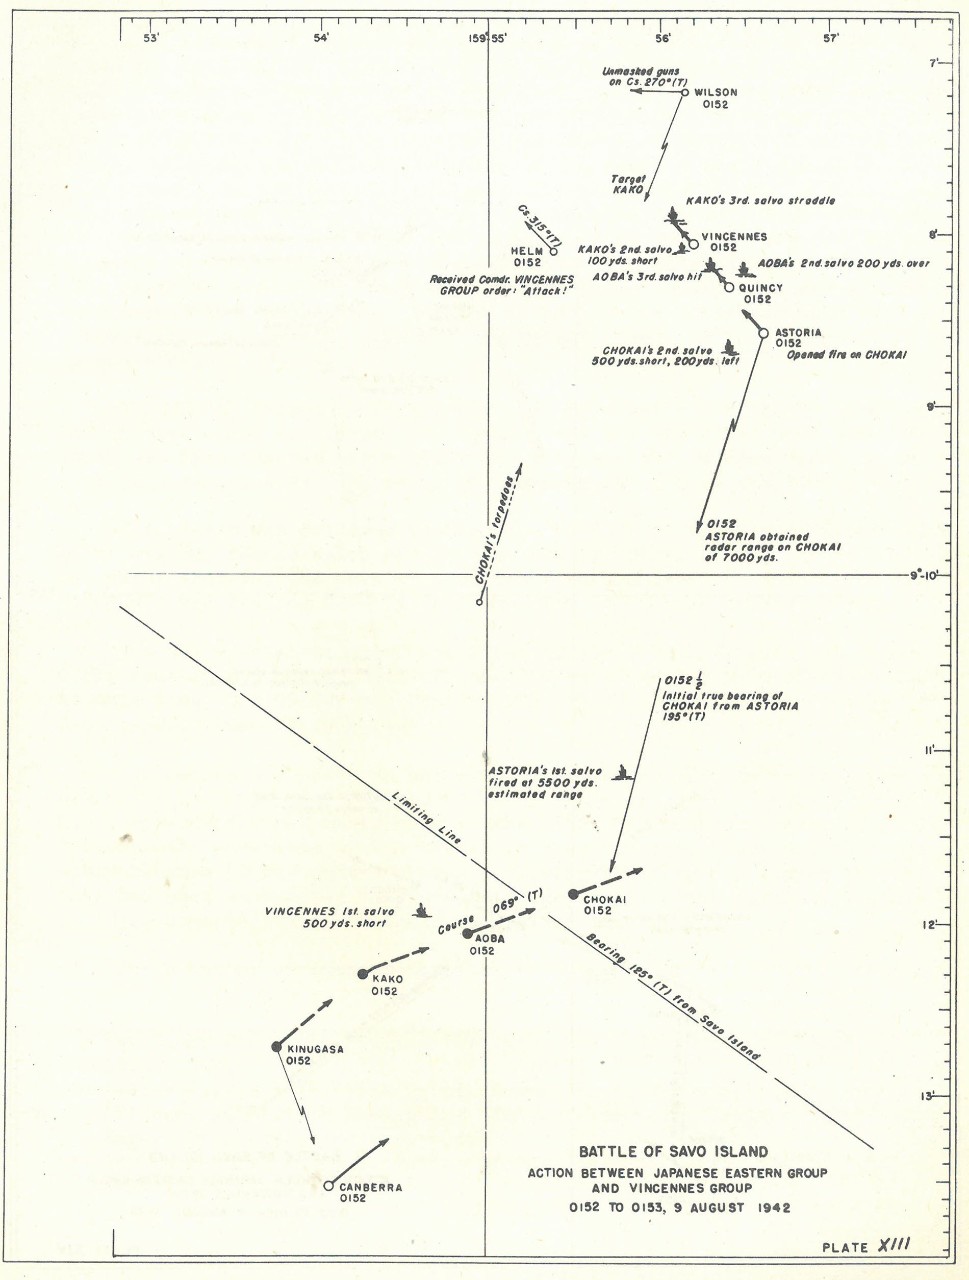 Plate 1: Battle of Savo Island, Action Between Japanese Eastern Group and Vincennes Group, 0152 to 0153, 9 August 1942 - chart - The Battle of Savo Island August 9, 1942 Strategical and Tactical Analysis